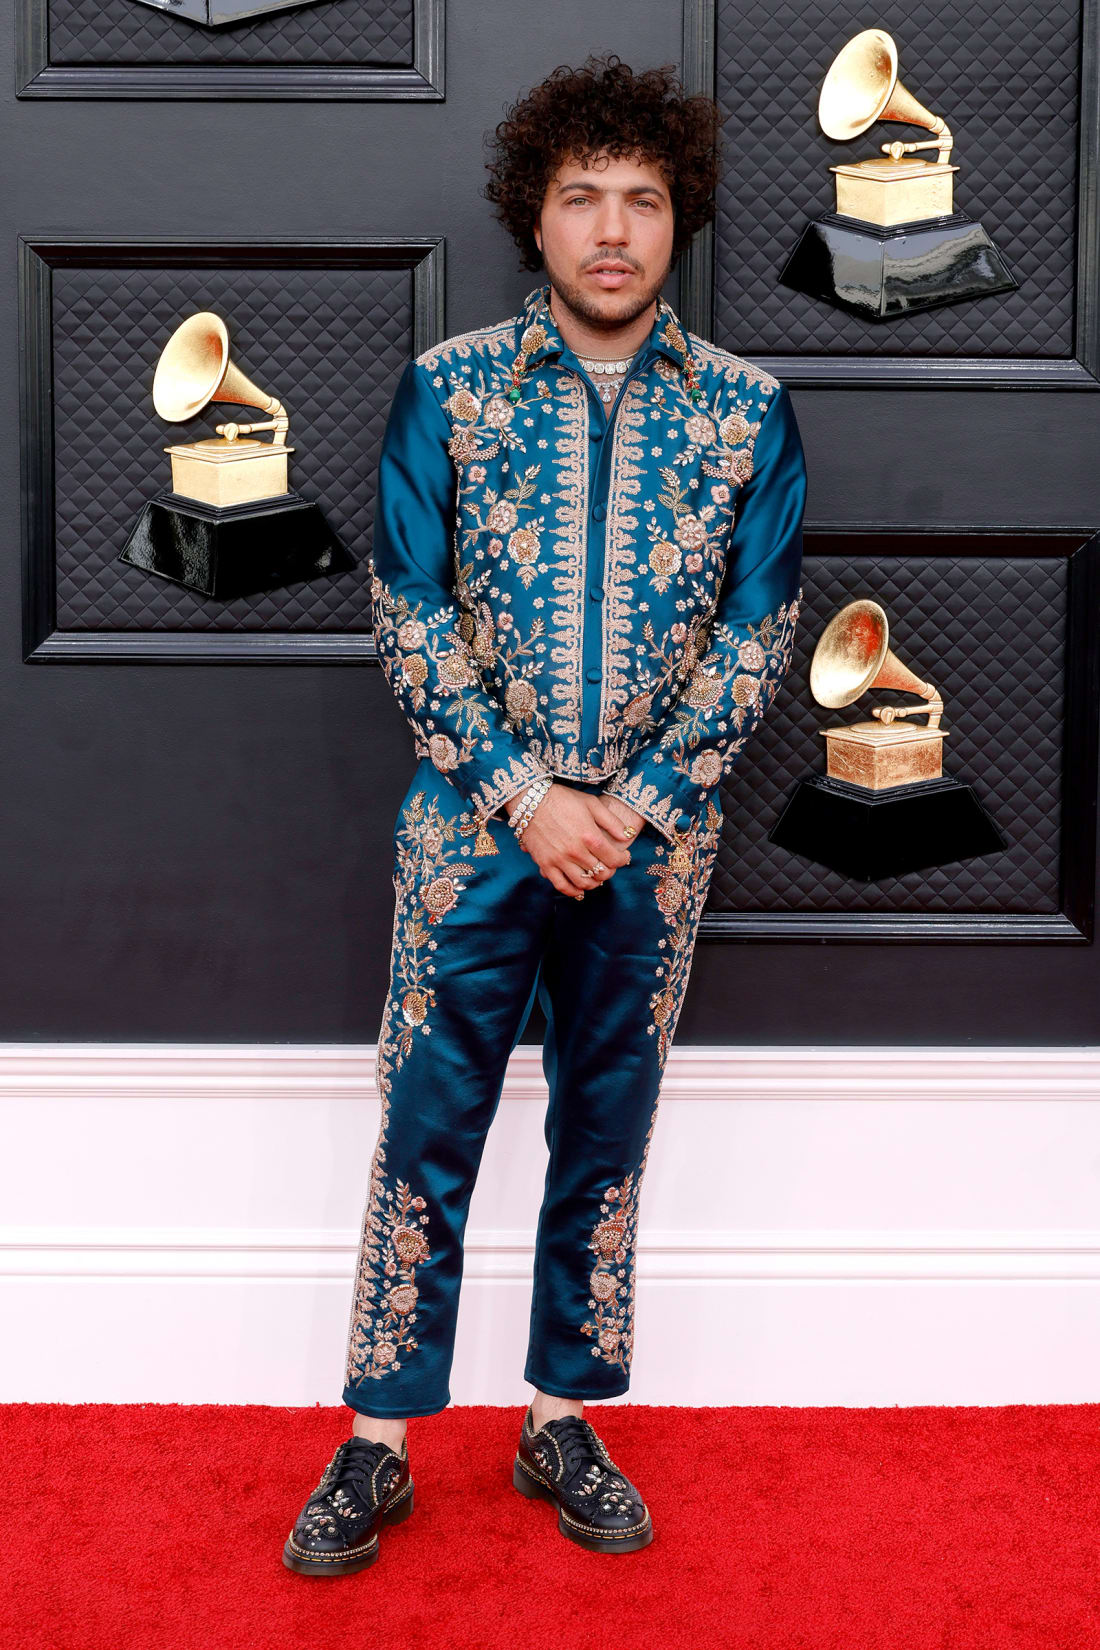 Muisc producer Benny Blanco arrived in an elaborately embroidered outfit with bejeweled shoes. 